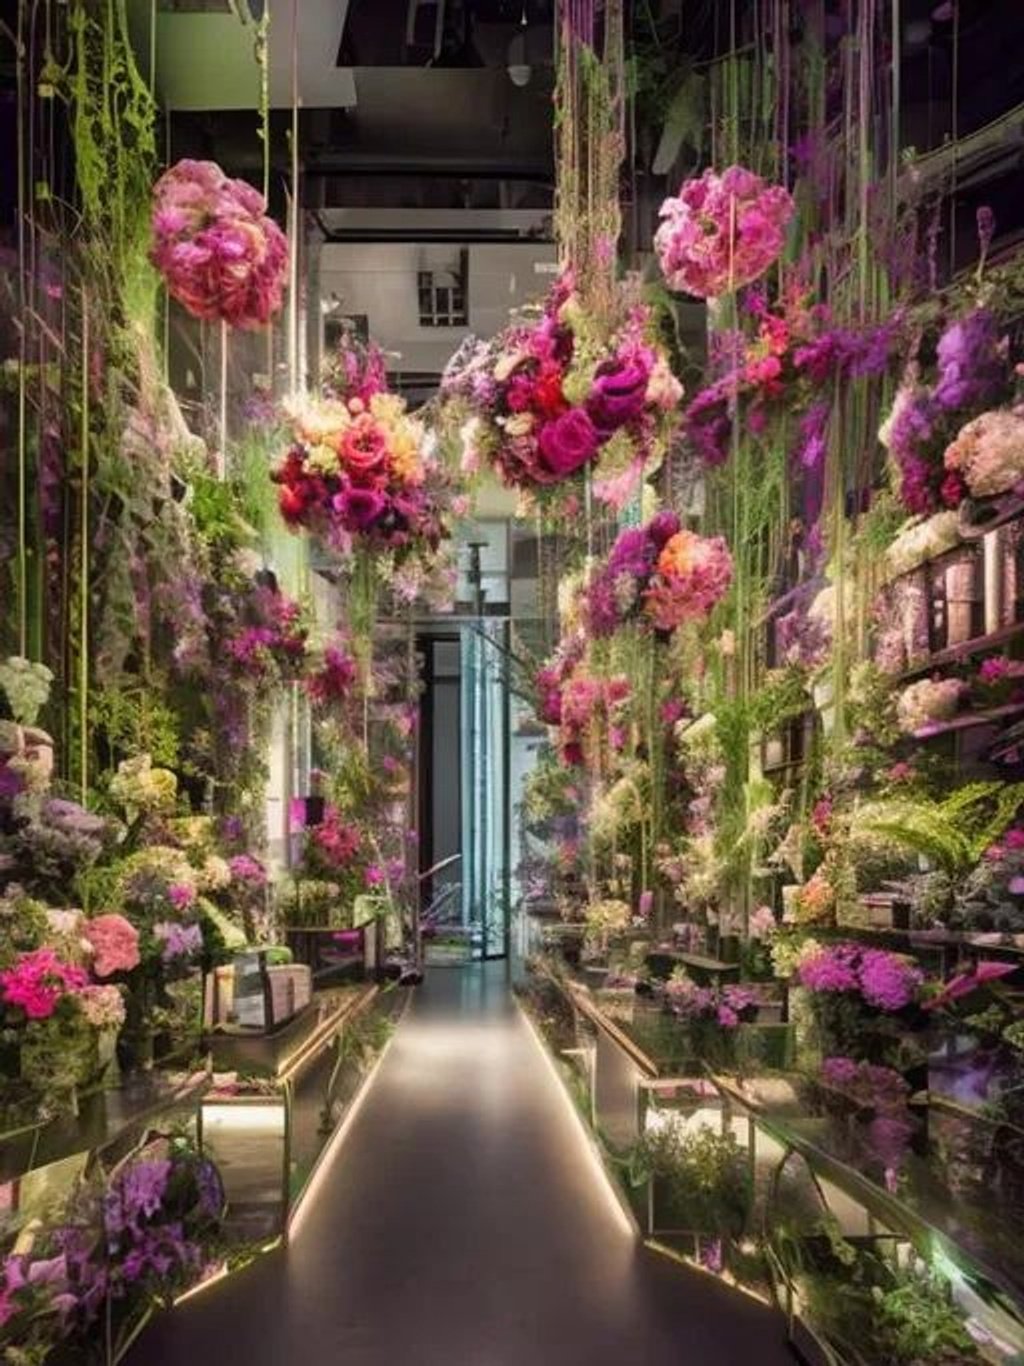 Prompt: An upscale florist and flower boutique's storefront in cyberpunk new york city